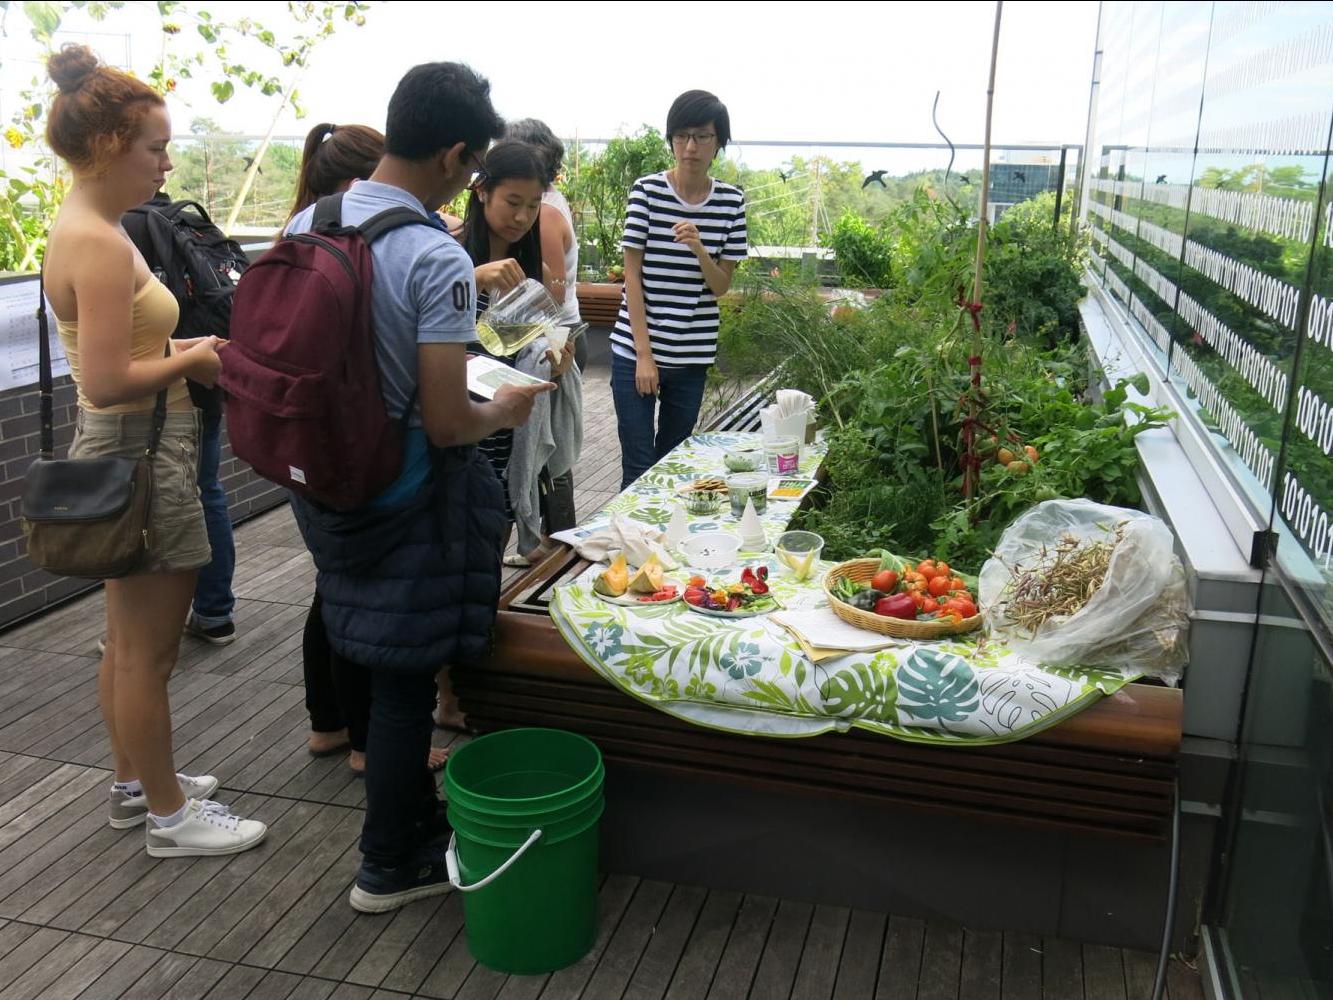 Students trying out fresh grown produce